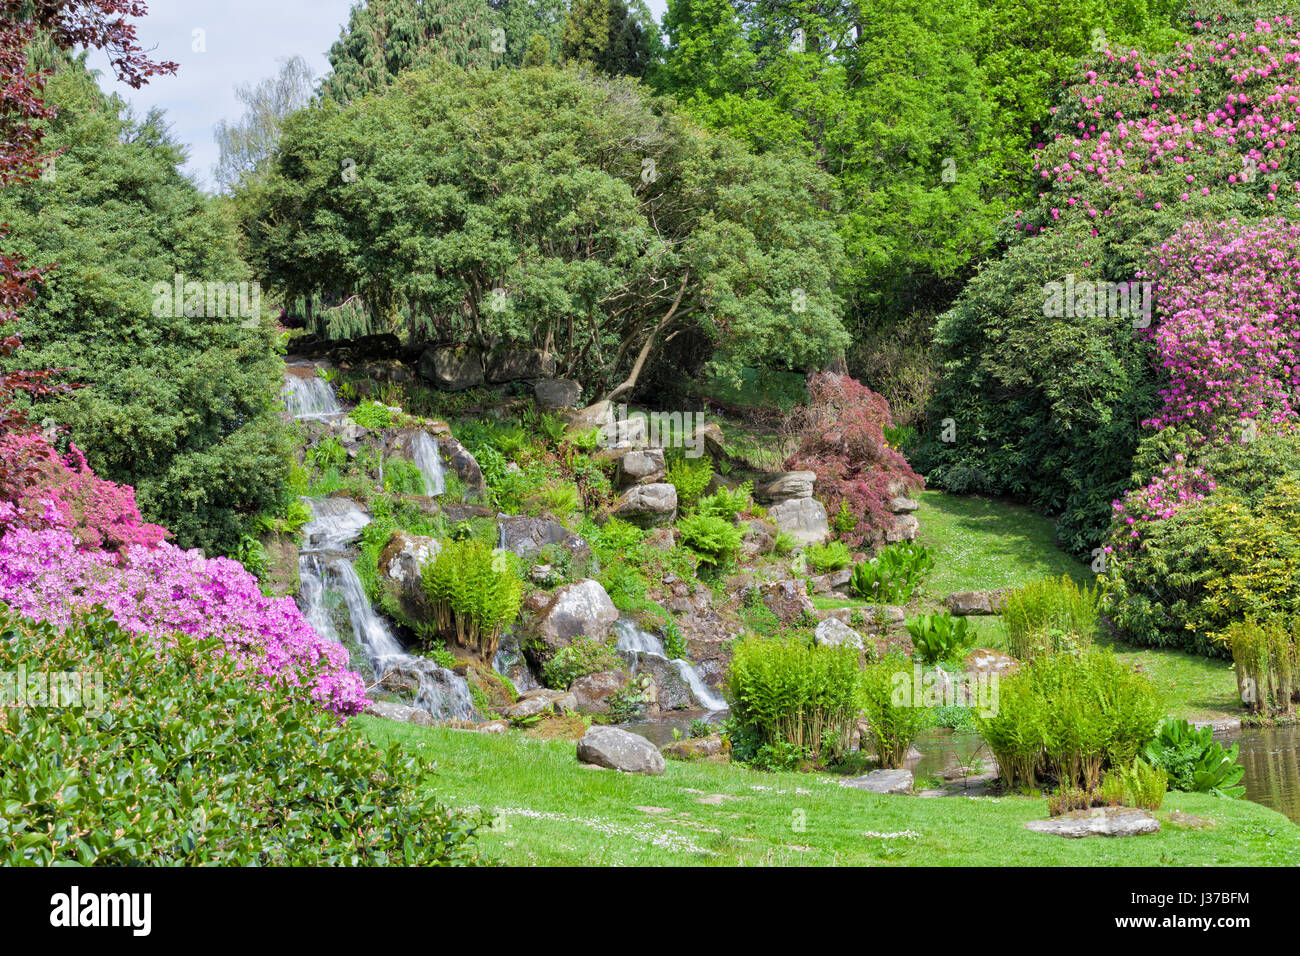 Colorful flowering garden with pink rhododendrons and azalea, rock waterfall, surrounded by mature trees and green fern, on a bank of a pond, springti Stock Photo